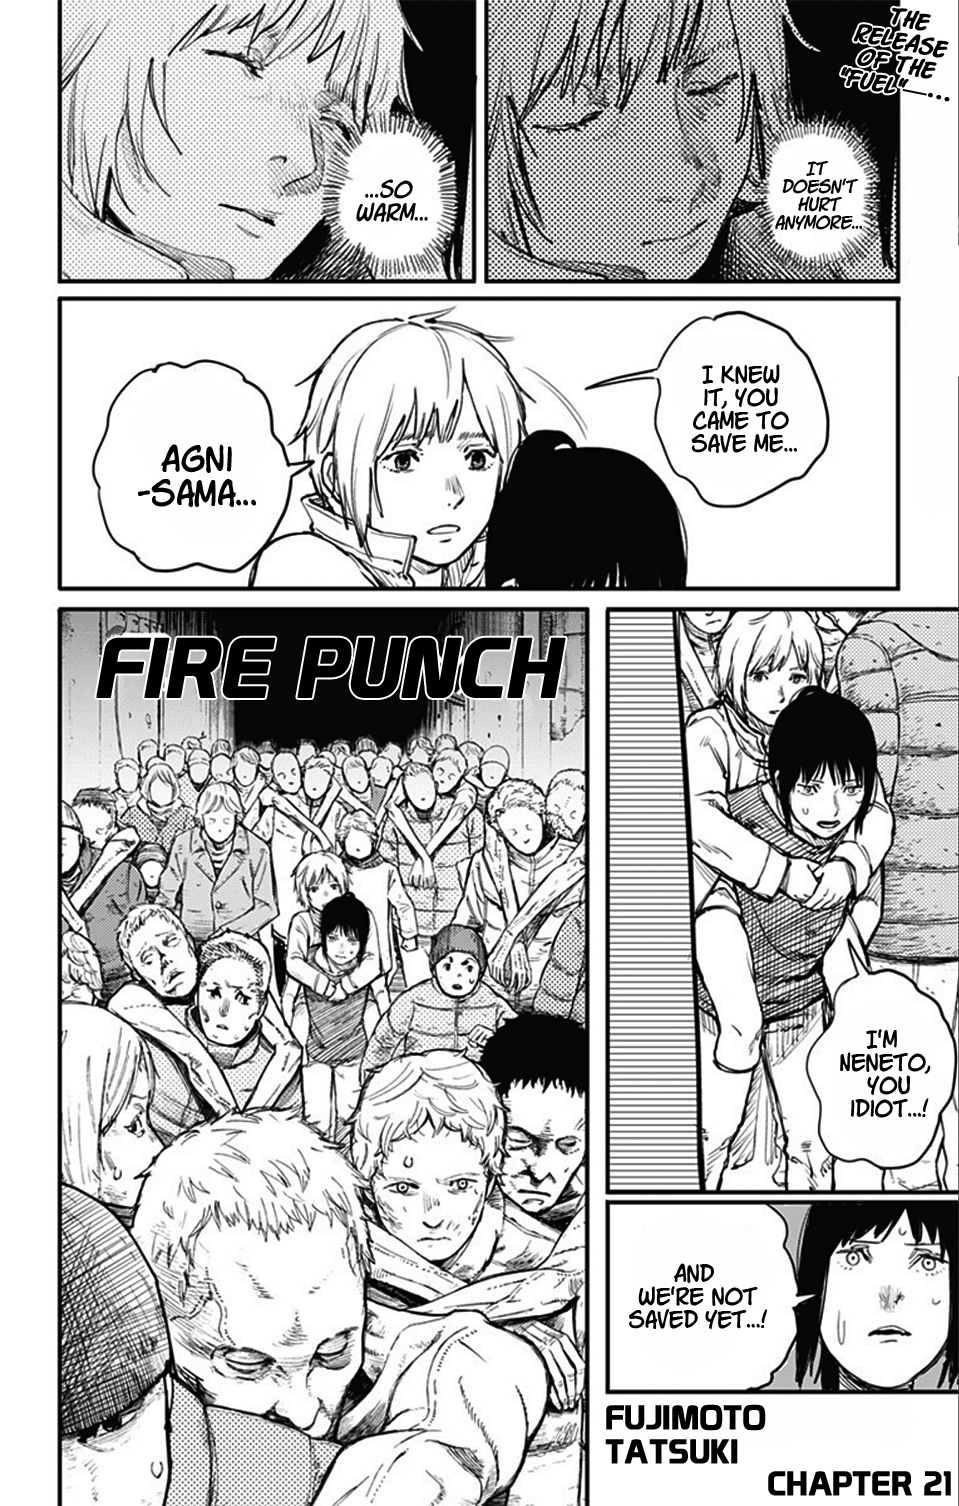 Fire Punch Vol.3-Chapter.21 Image